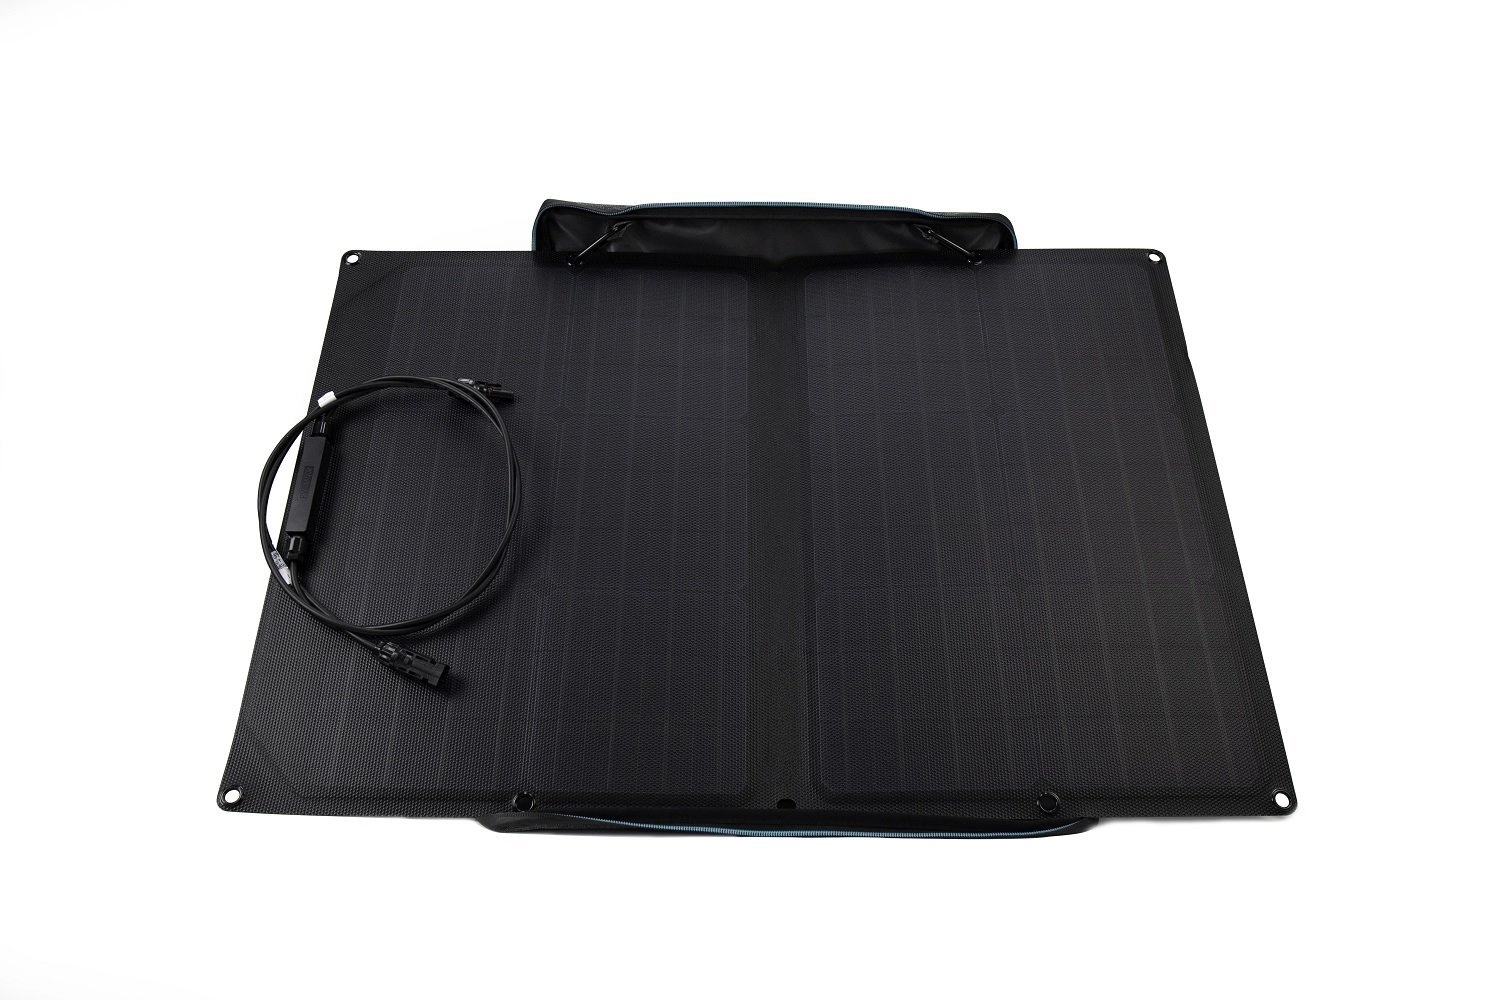 Ecoflow photovoltaic panel for 110 W power station